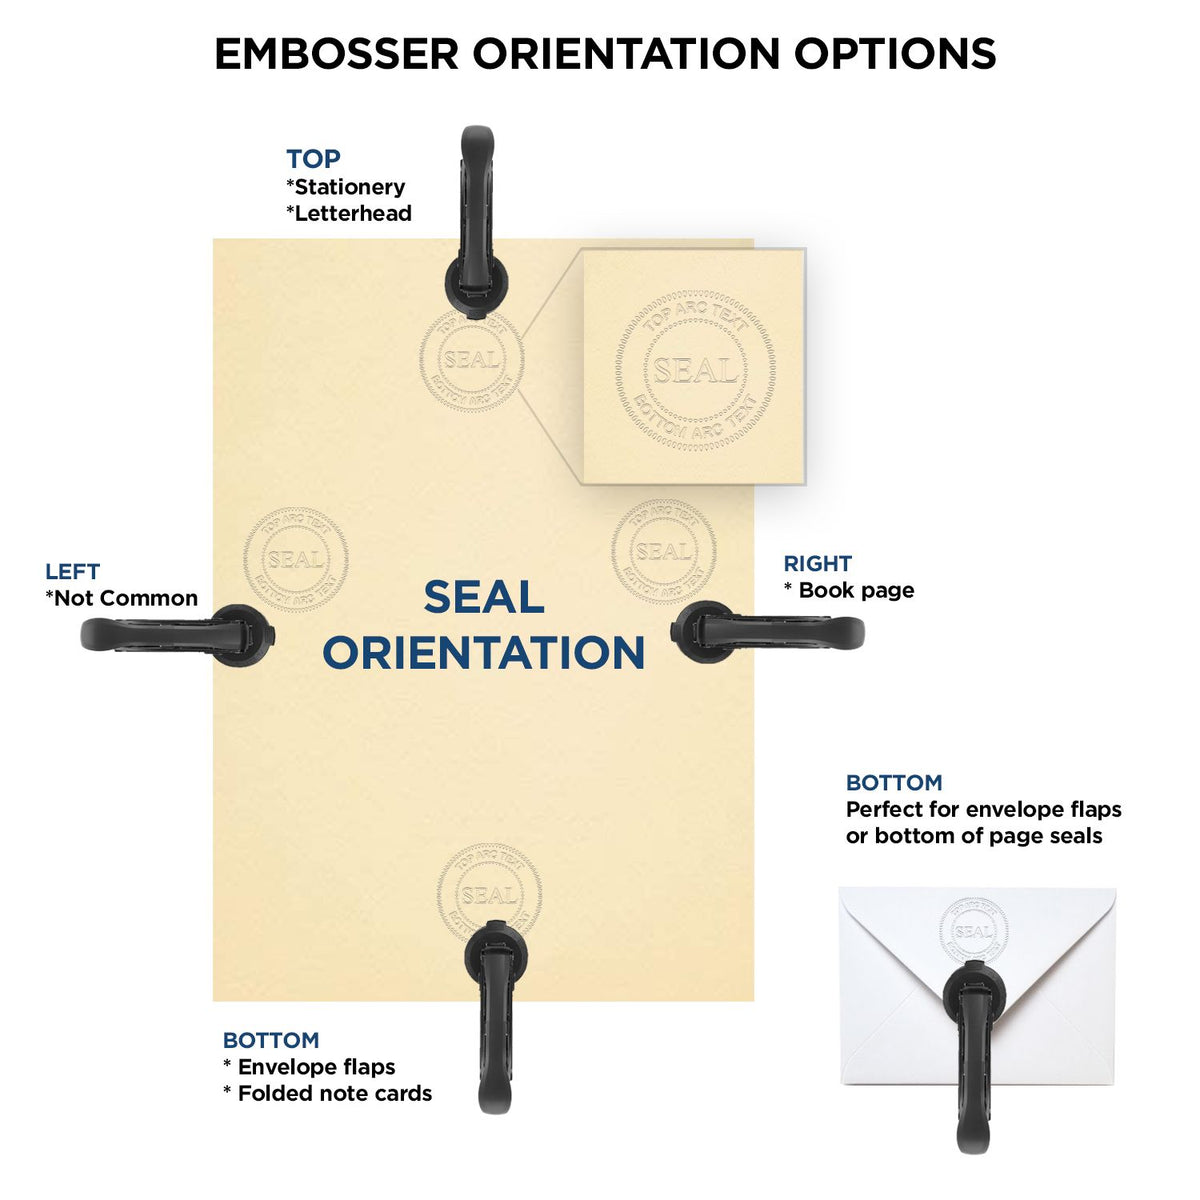 An infographic for the Long Reach Guam Land Surveyor Seal showing embosser orientation, this is showing examples of a top, bottom, right and left insert.